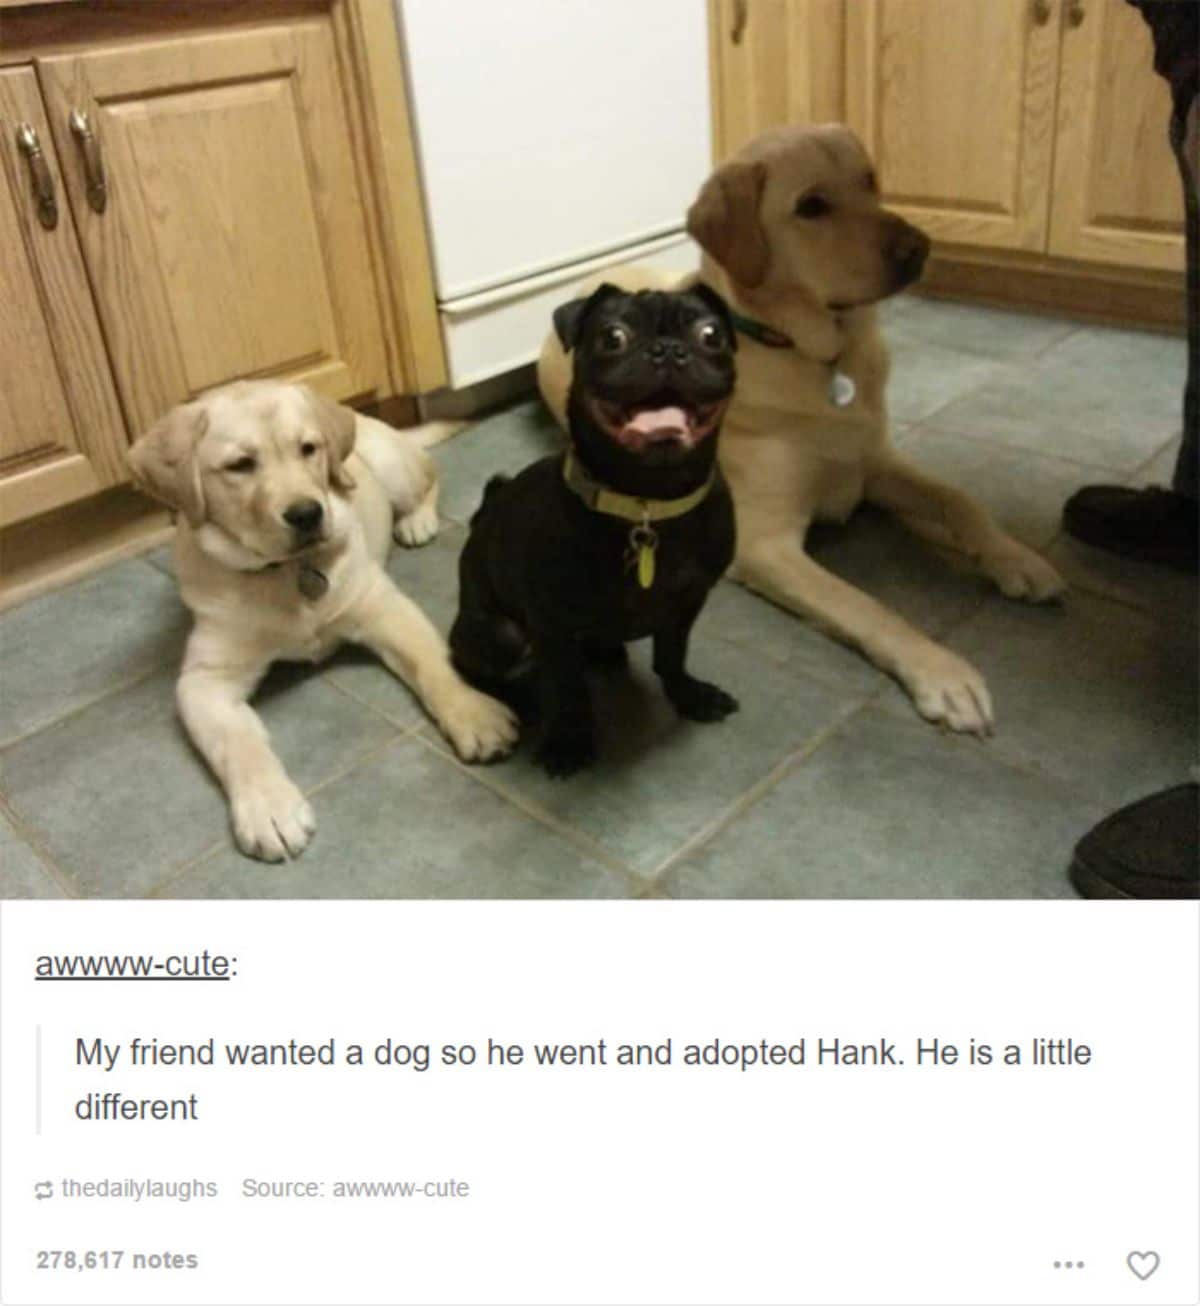 tumblr post of a yellow labrador retriever adult and puppy with a smiling black pug in the middle and the caption says that Hank the pug is a little different